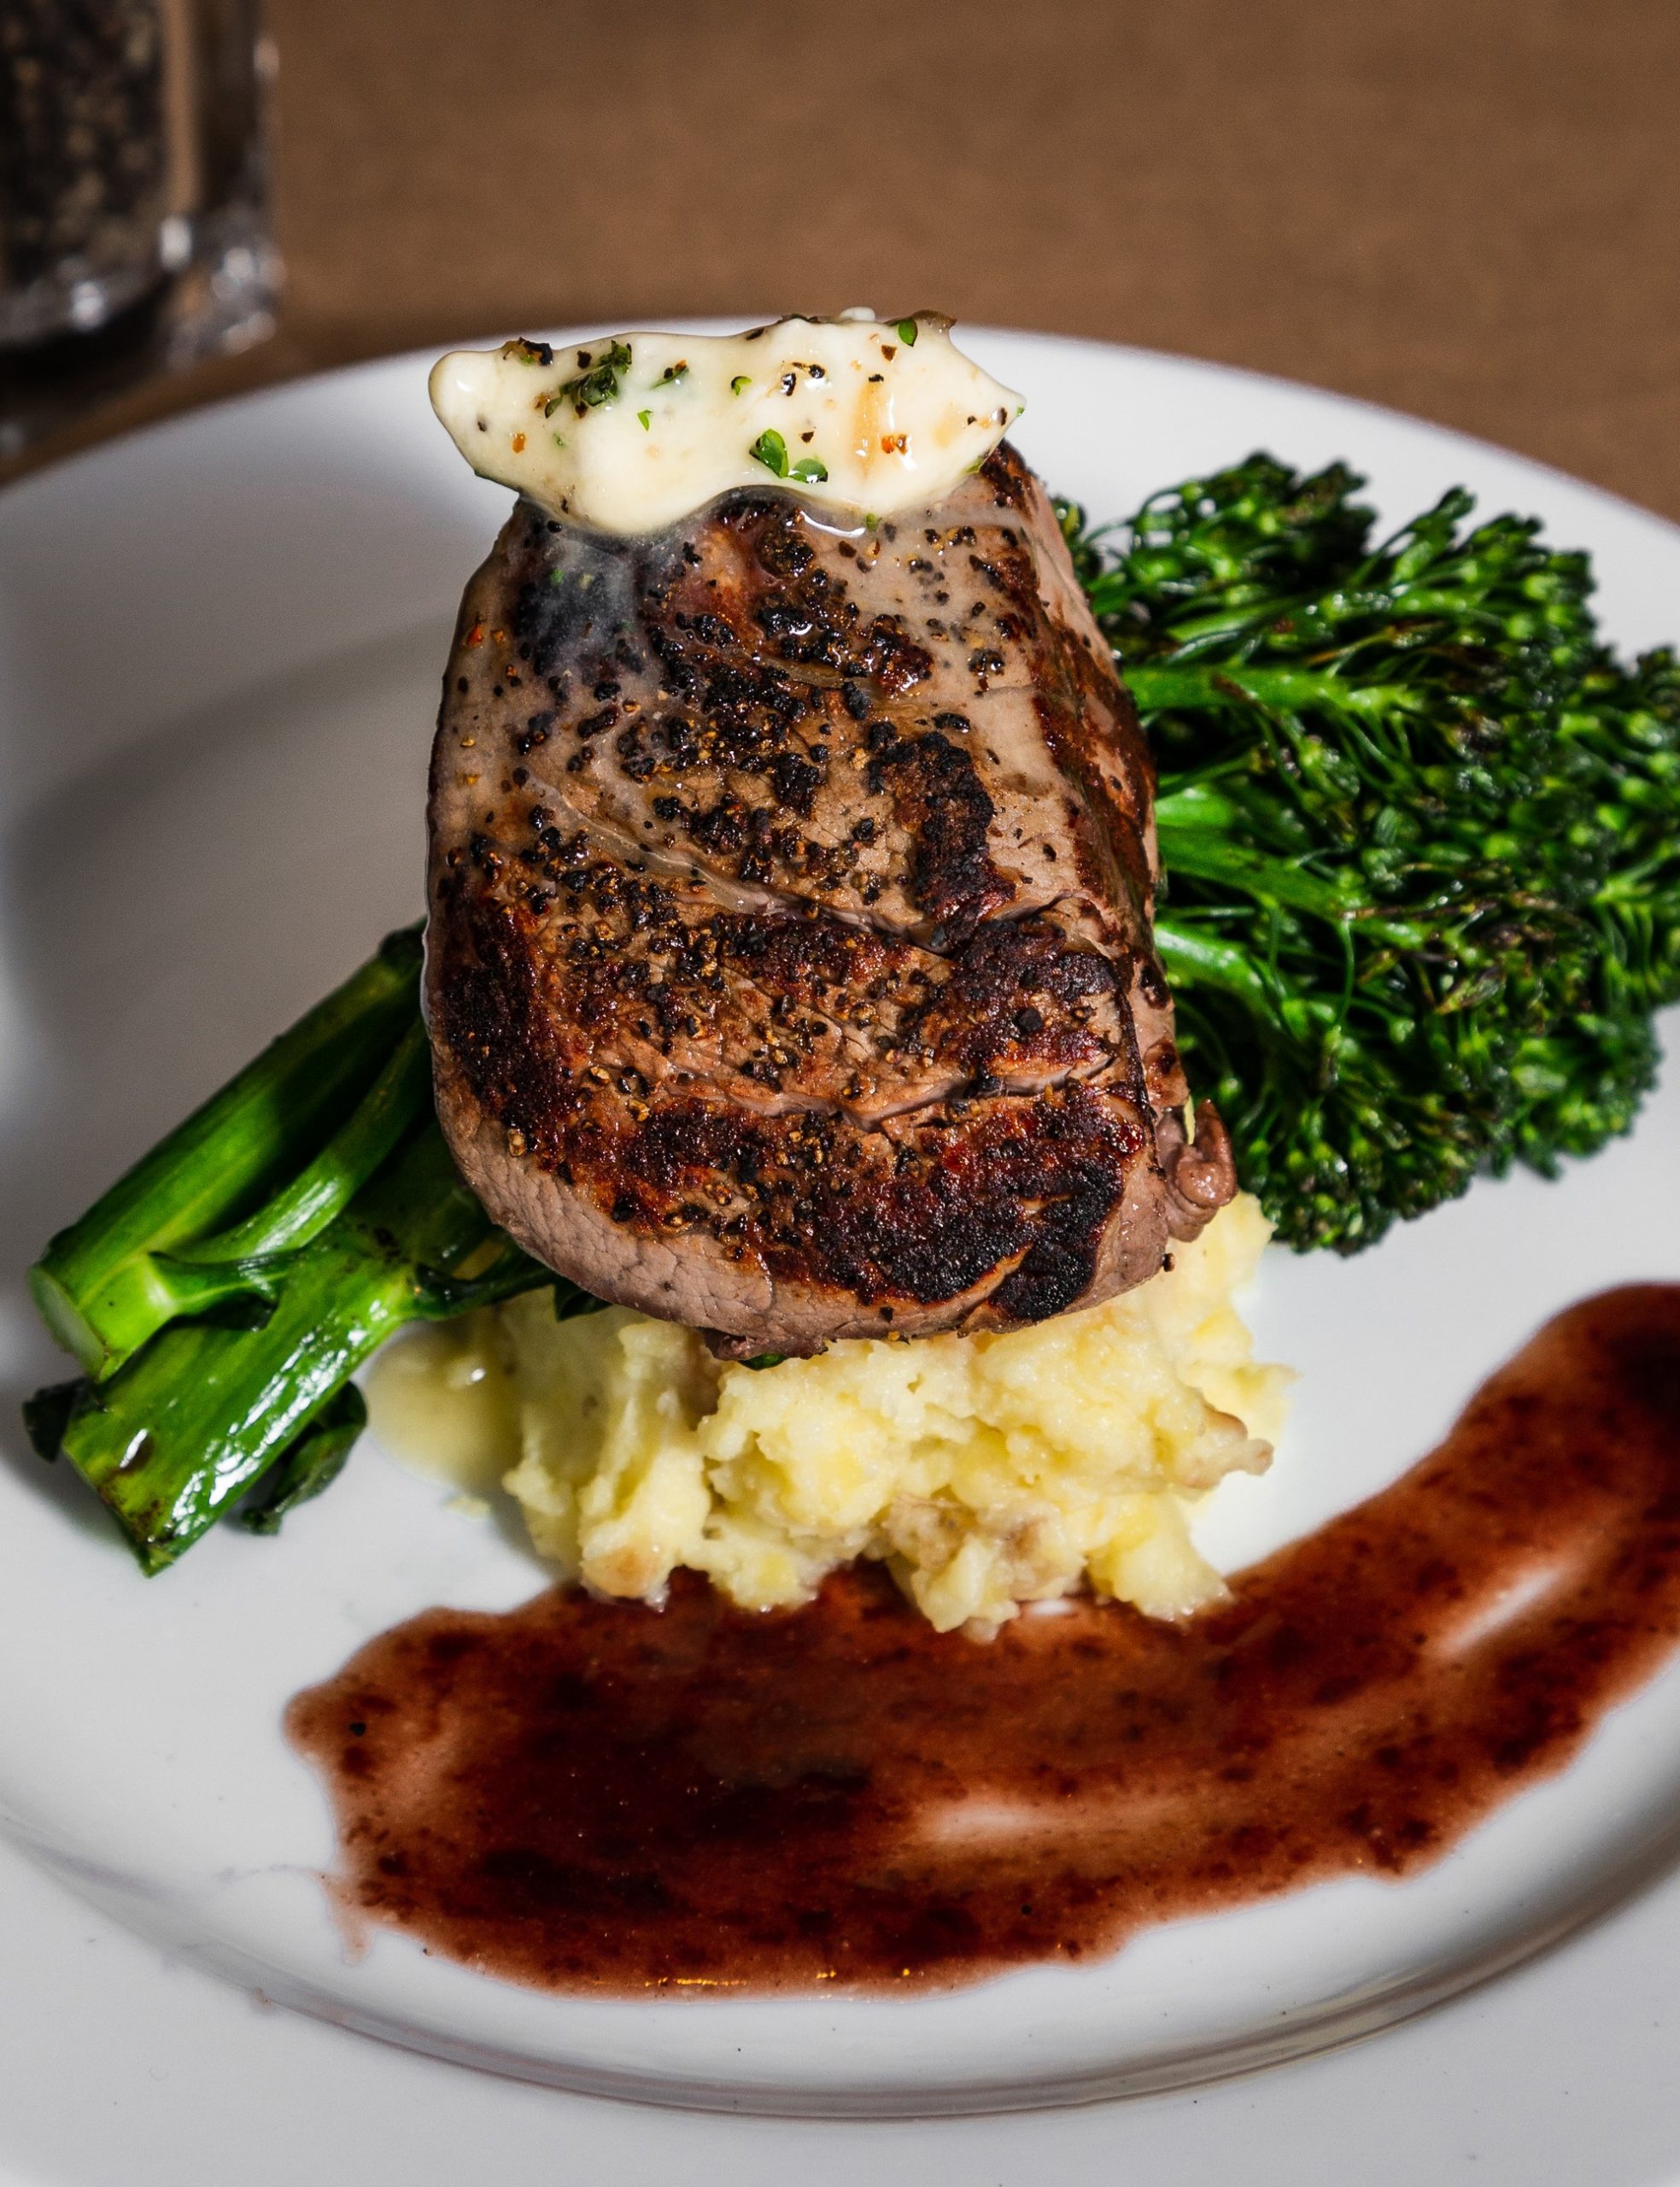 Center-cut filet is one of the featured entrees on the Valentine's Day menu at Braddock's Rebellion.